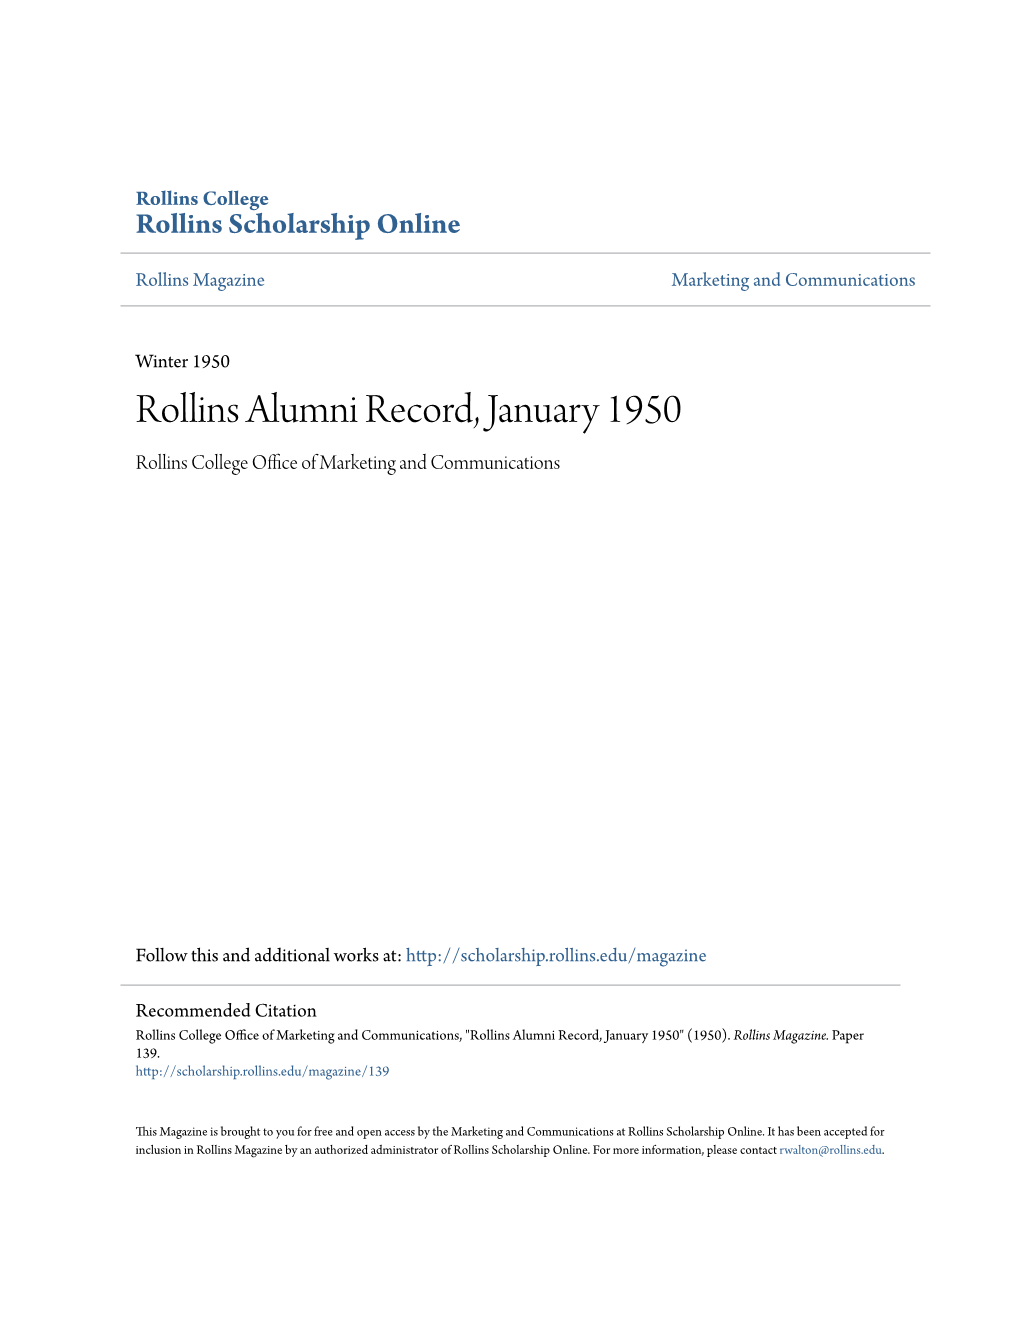 Rollins Alumni Record, January 1950 Rollins College Office Ofa M Rketing and Communications